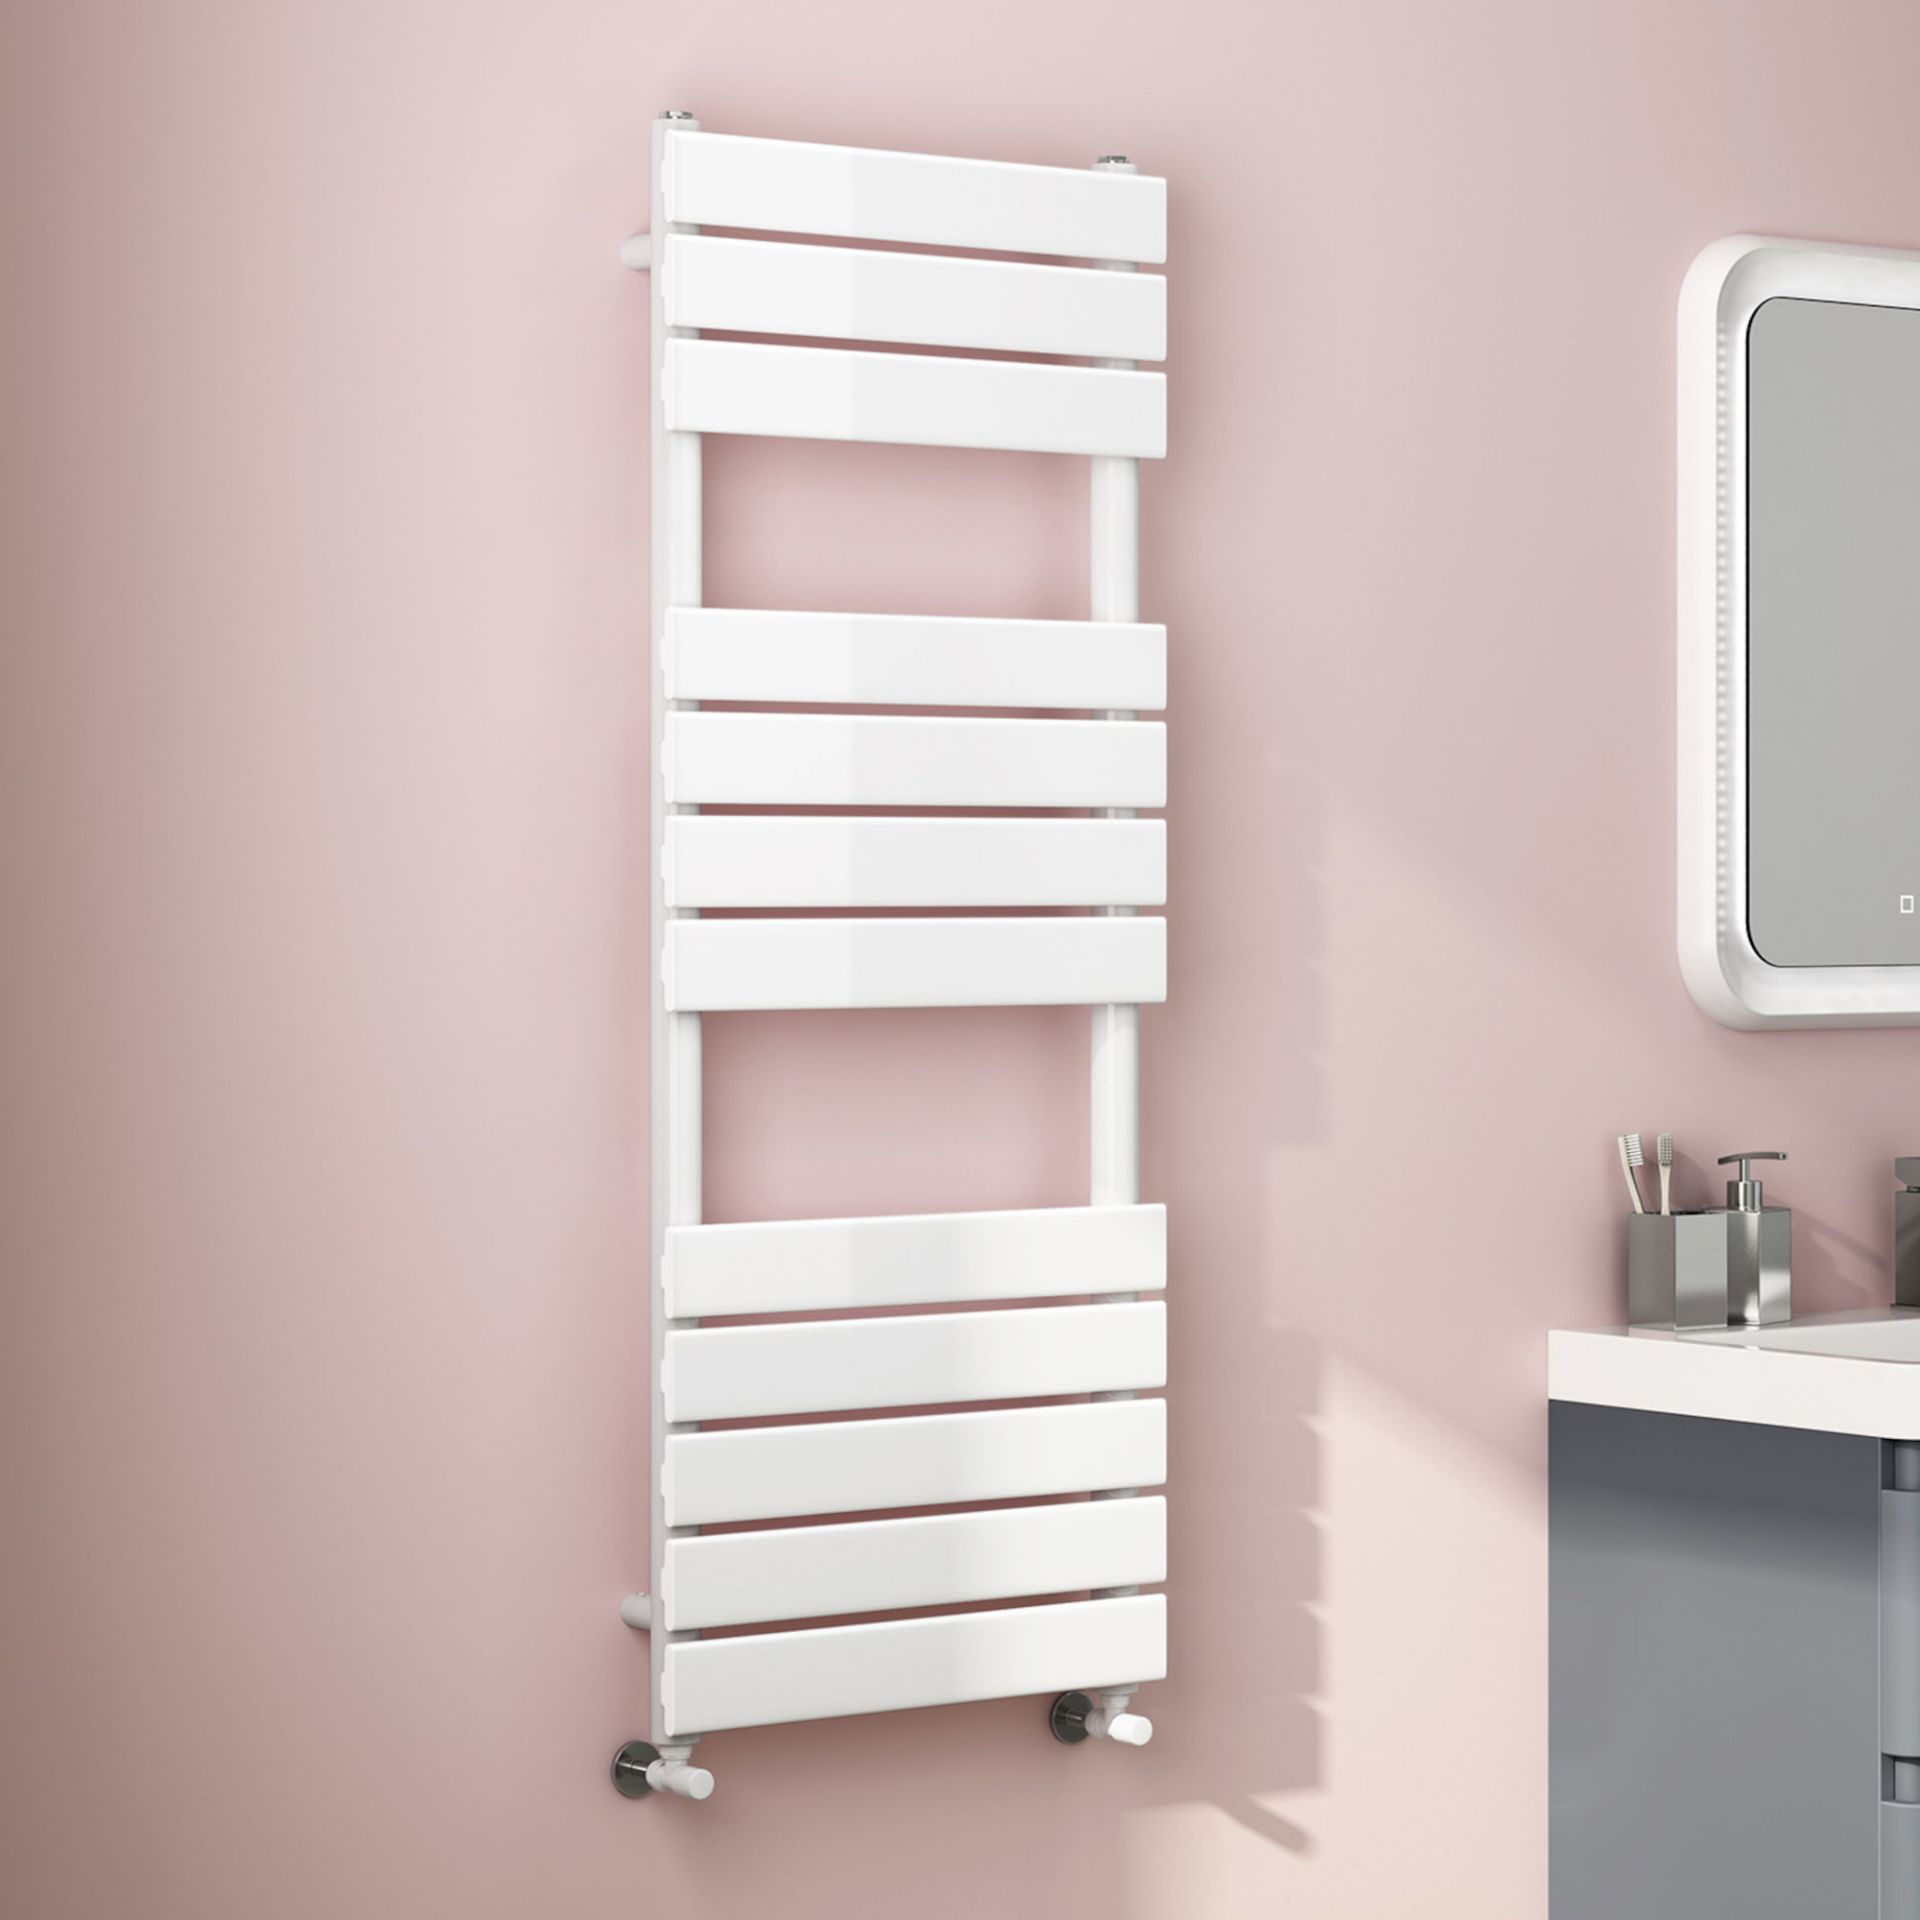 (TP92) 1200x450mm White Flat Panel Ladder Towel Radiator. Made from low carbon steel with a high